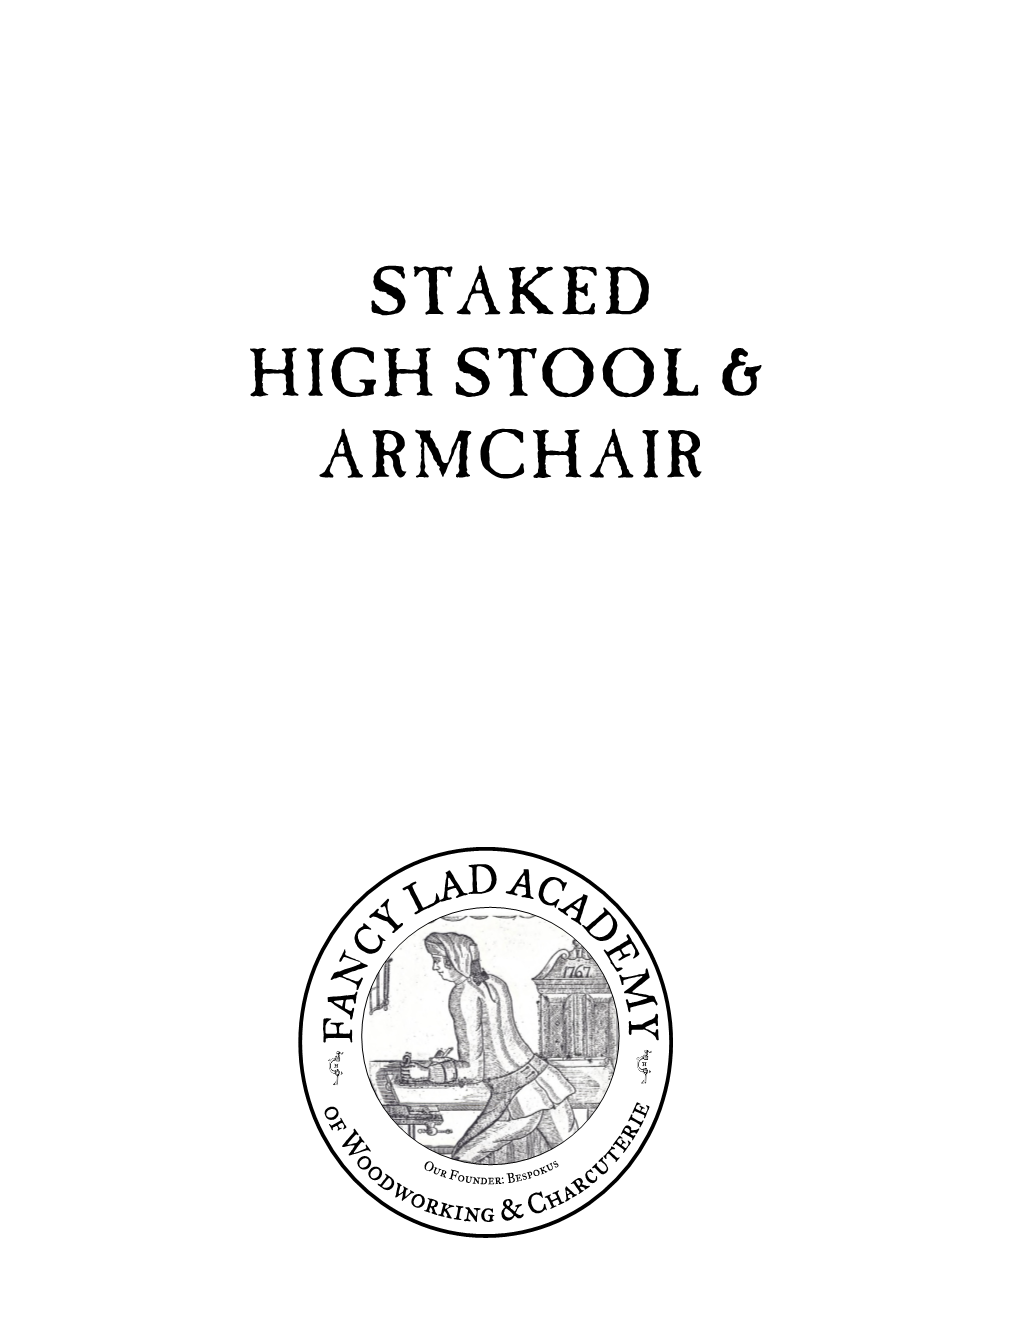 Staked High Stool & Armchair